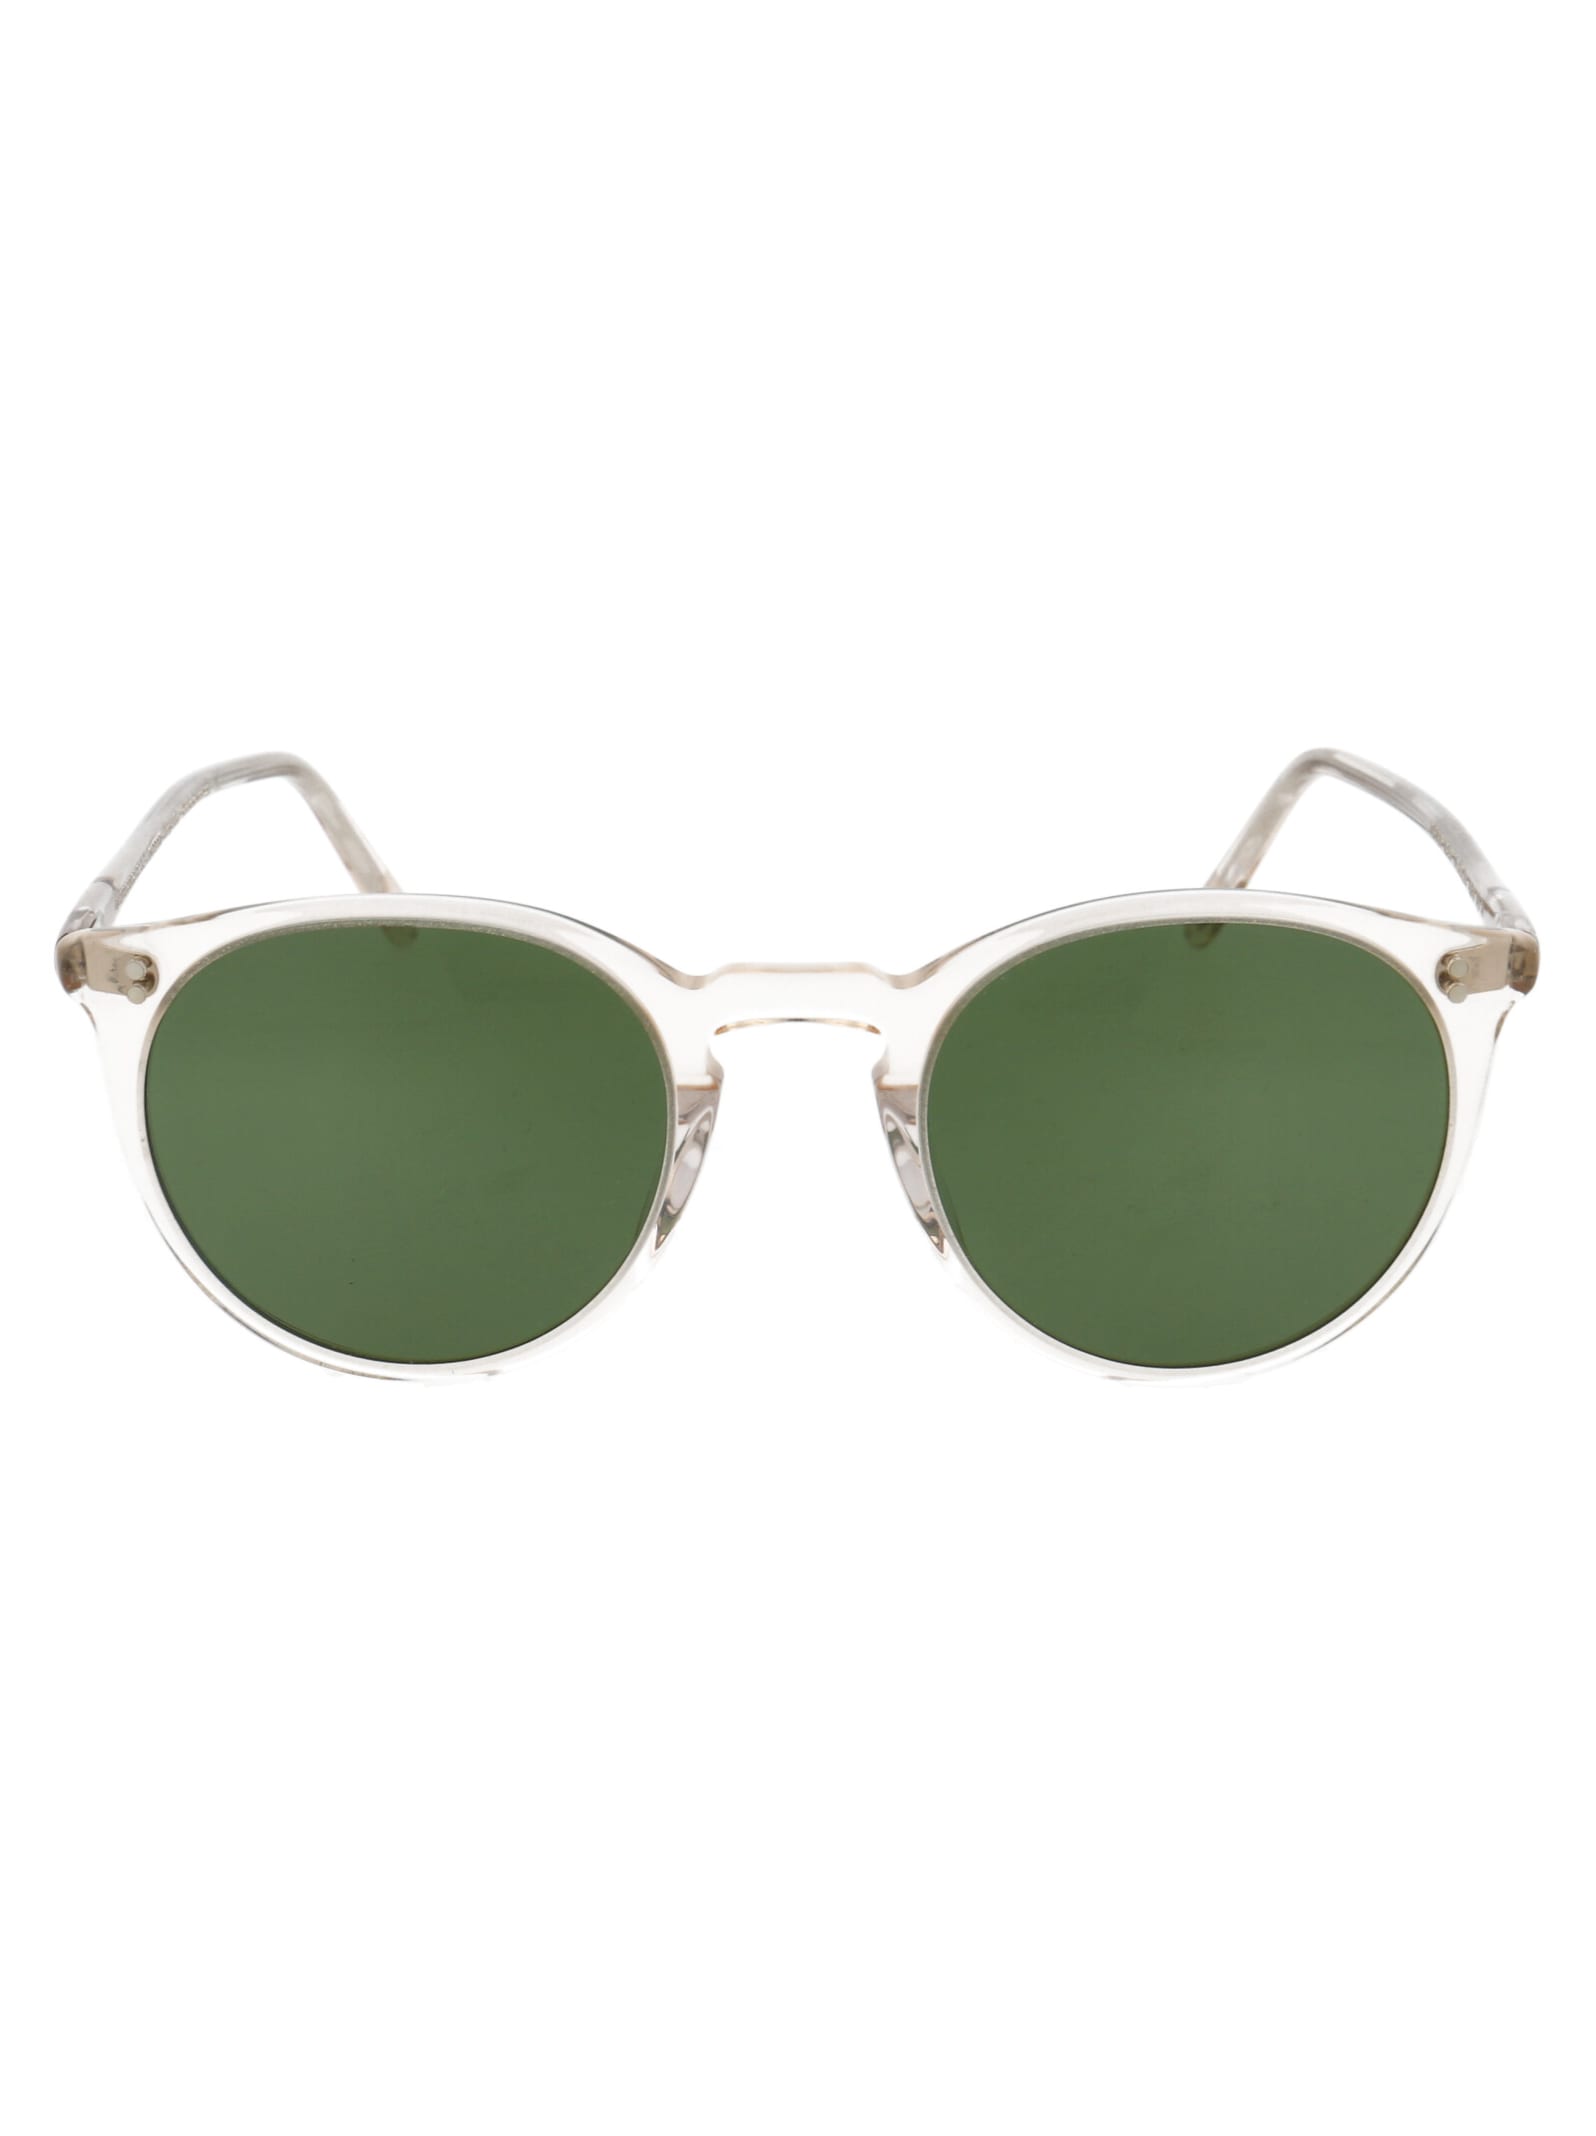 OLIVER PEOPLES OMALLEY SUN SUNGLASSES,11740205